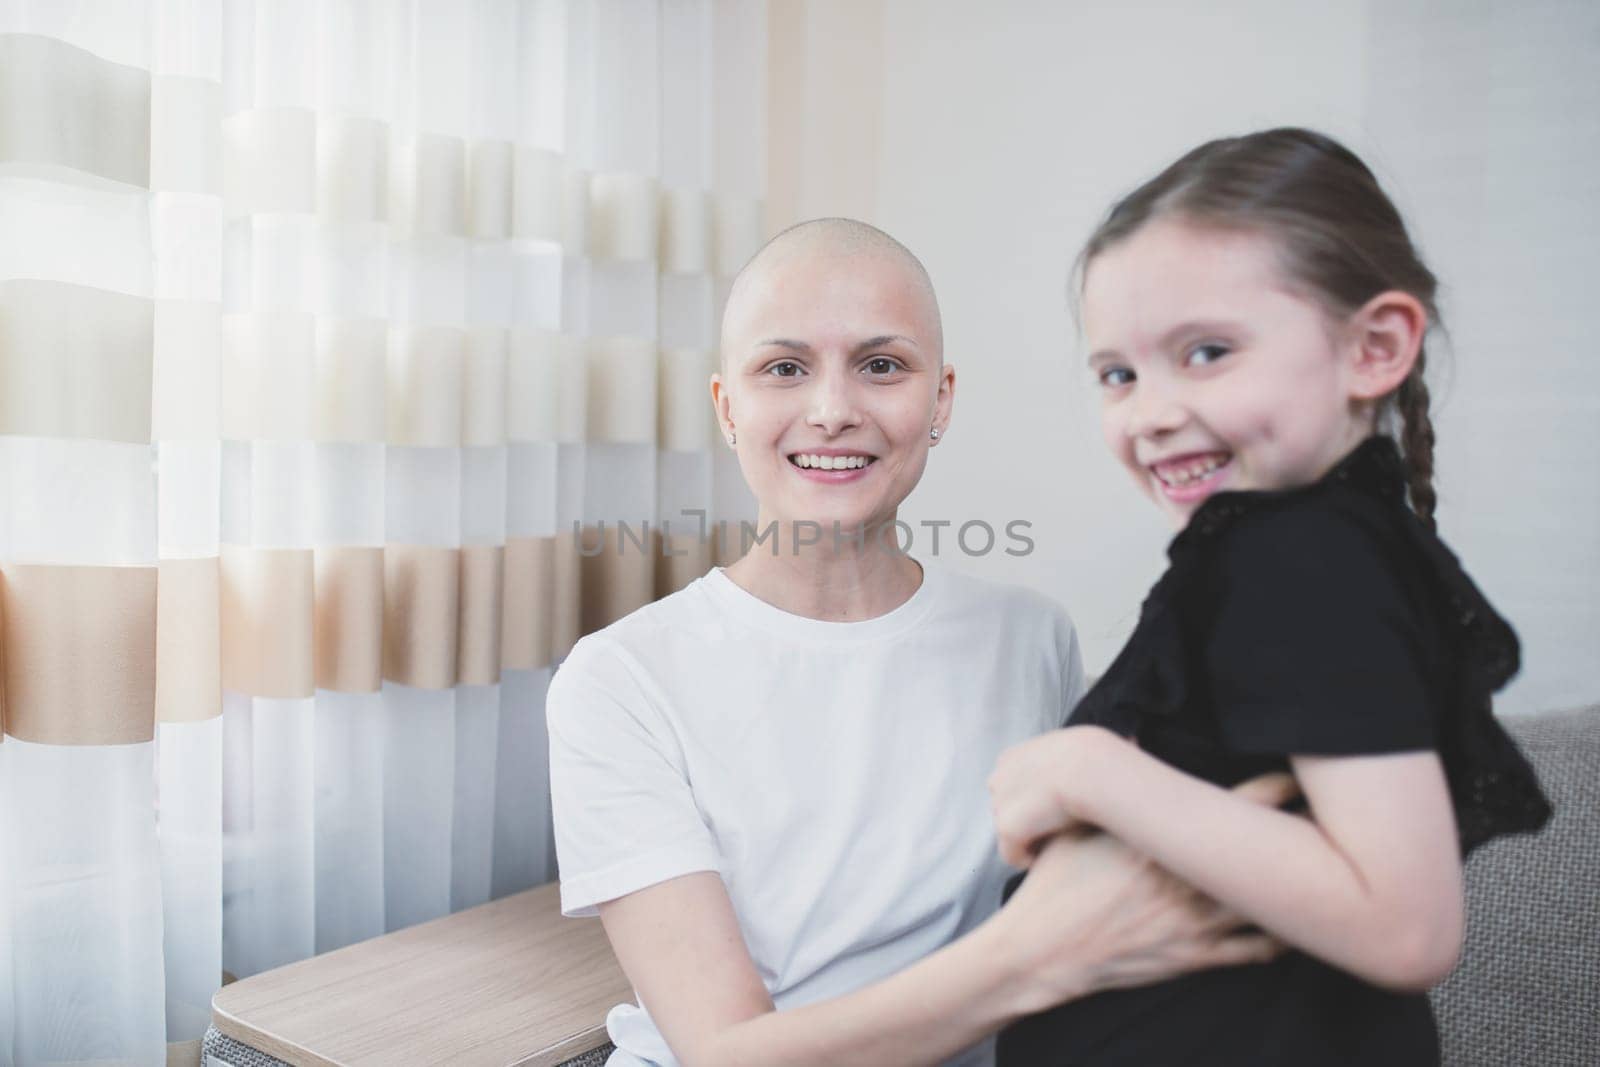 Happy bald woman with alopecia smiling and joyful spending time with her daughter.